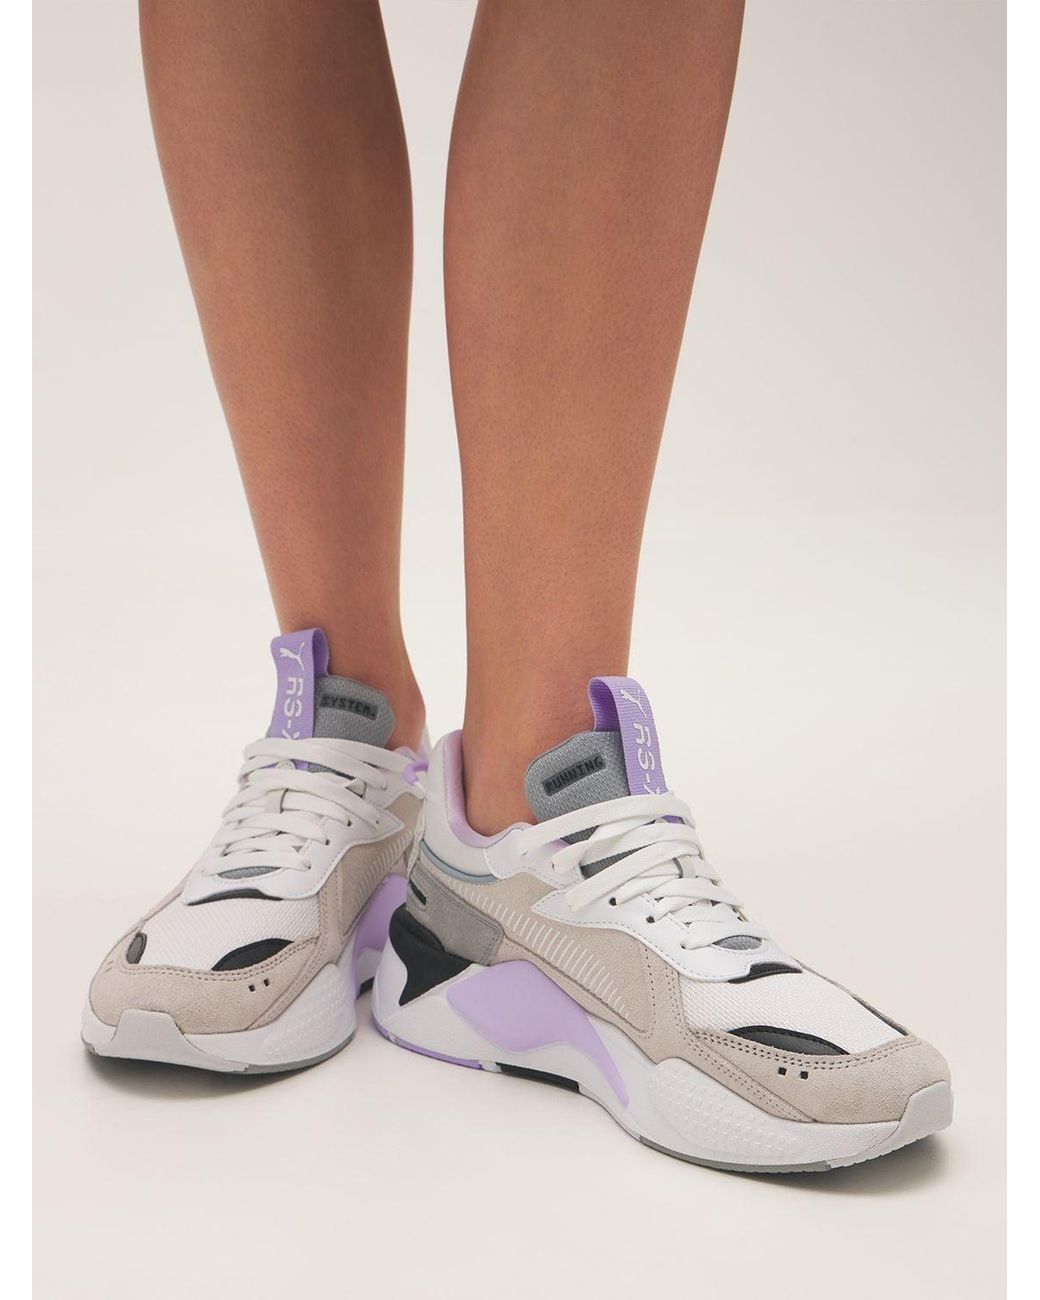 PUMA Rs-x Reinvent Sneakers in White/Lilac (White) | Lyst